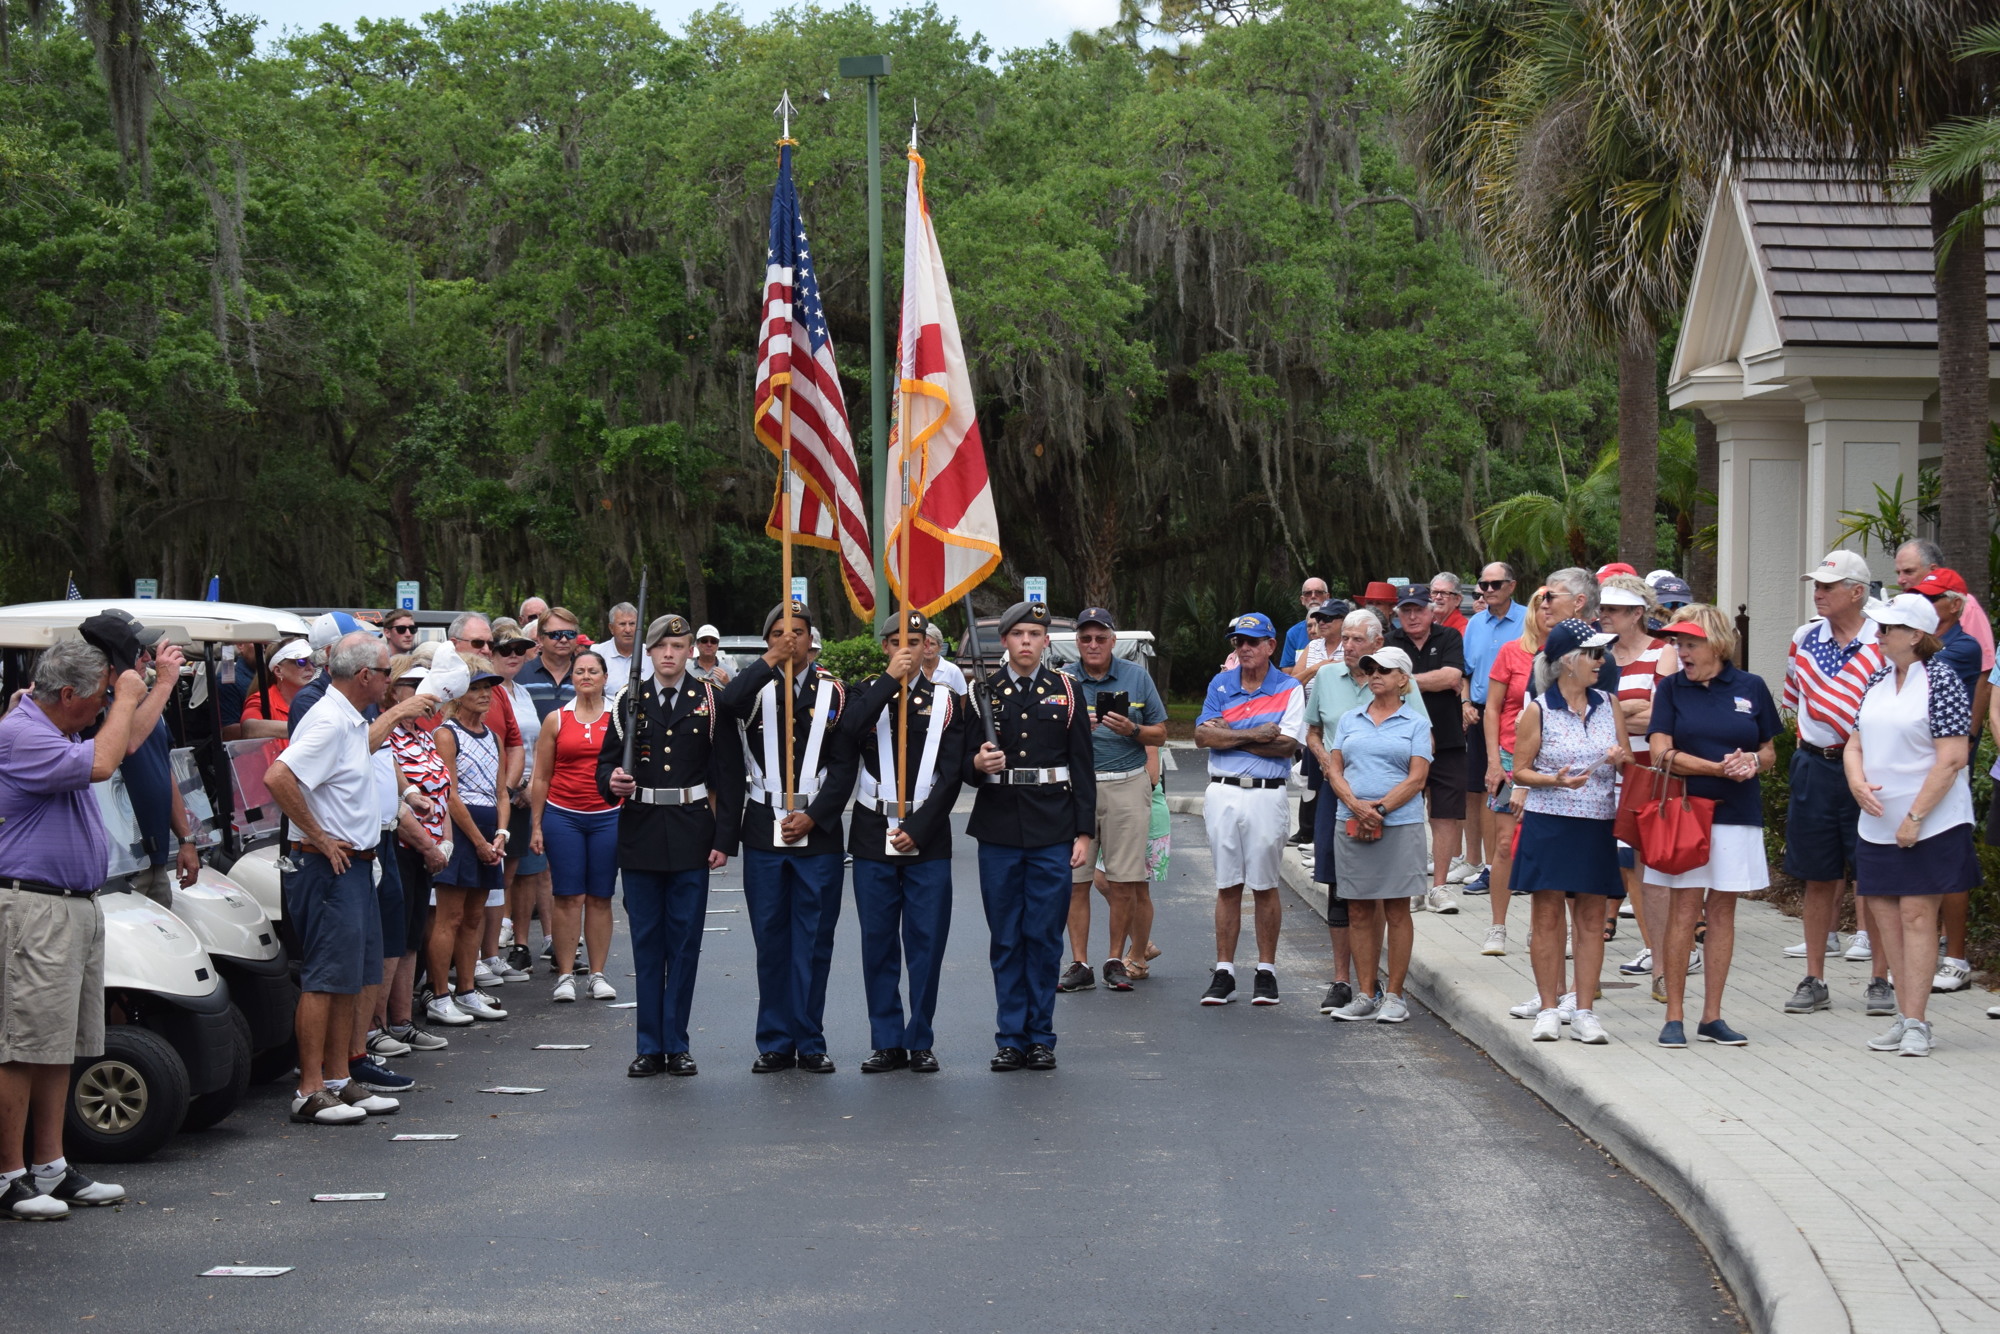 Sarasota Military Academy seniors William Ries and Sebastian Katra and juniors Raphael Fabyanic and Andrew Harvey present the colors to kick off the ceremony.